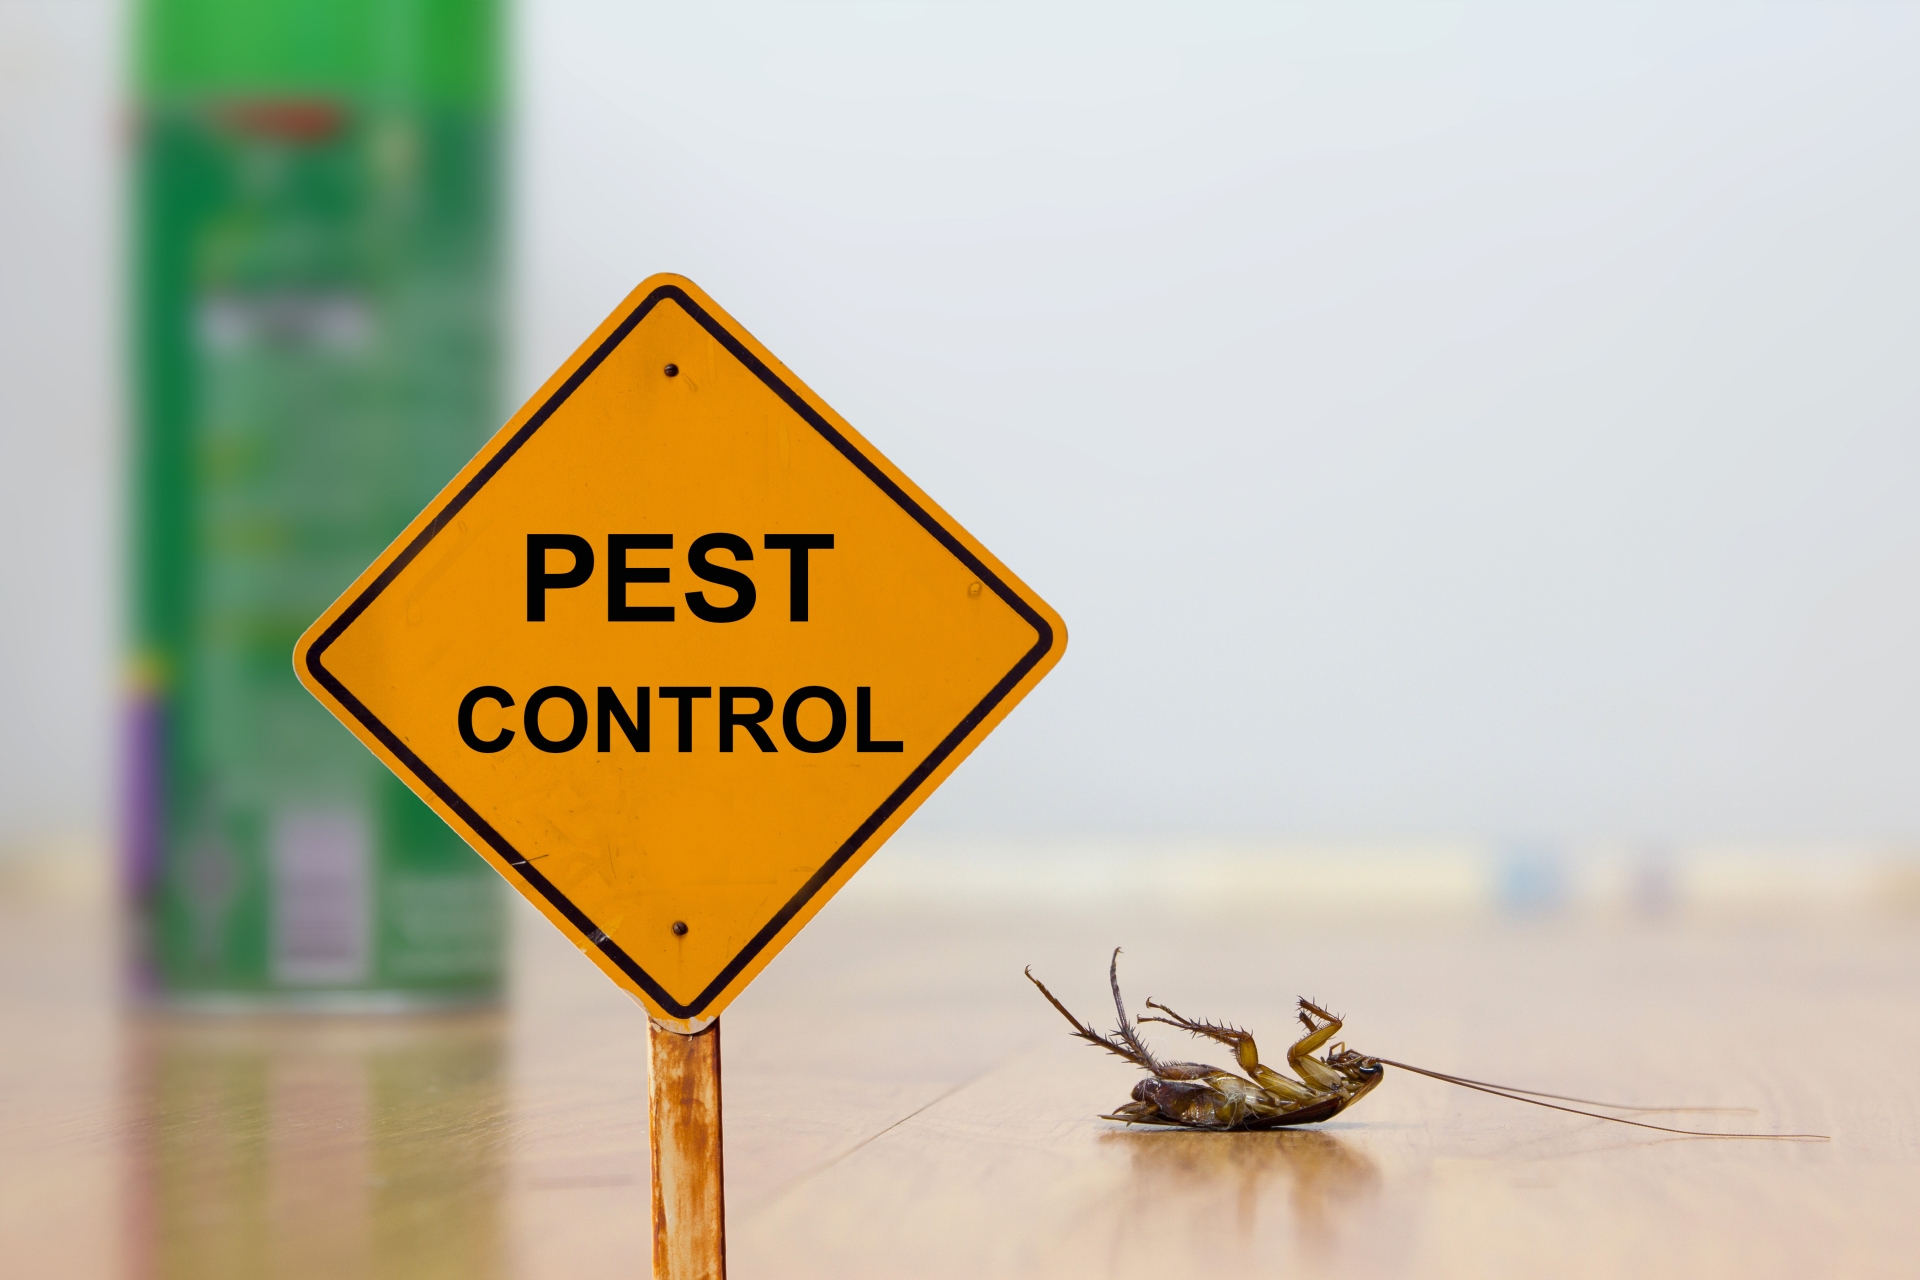 24 Hour Pest Control, Pest Control in Finsbury Park, Manor House, N4. Call Now 020 8166 9746